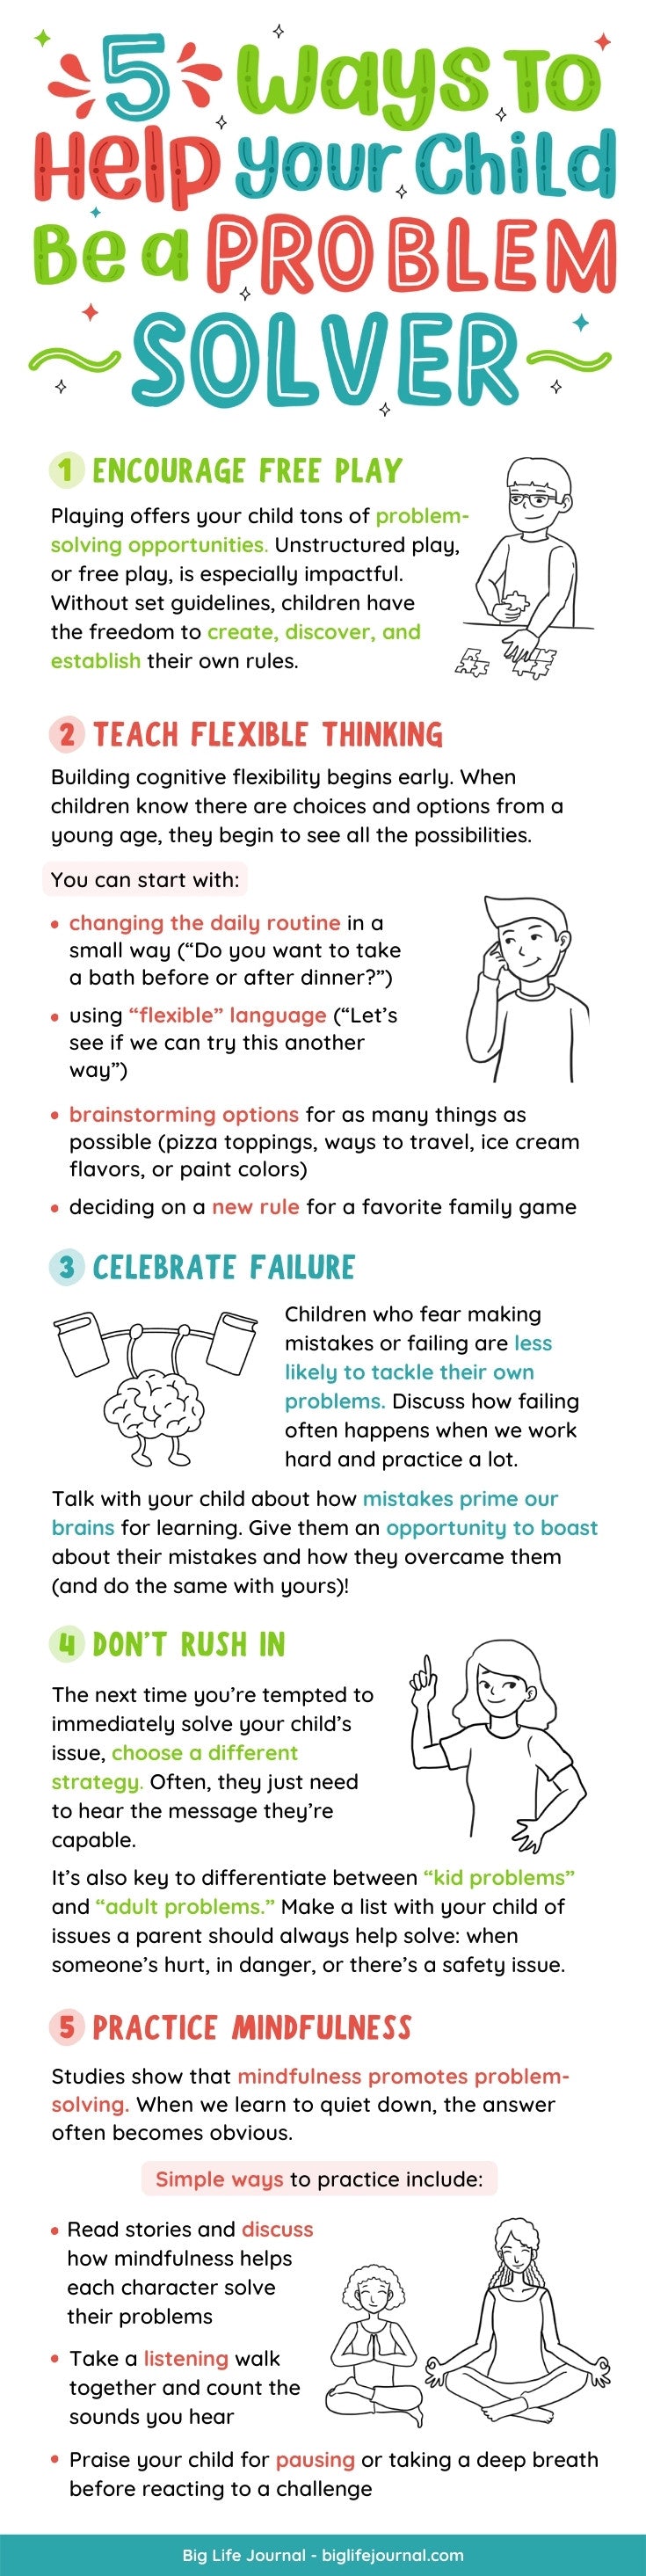 5 Ways to Help Your Child be a Problem Solver